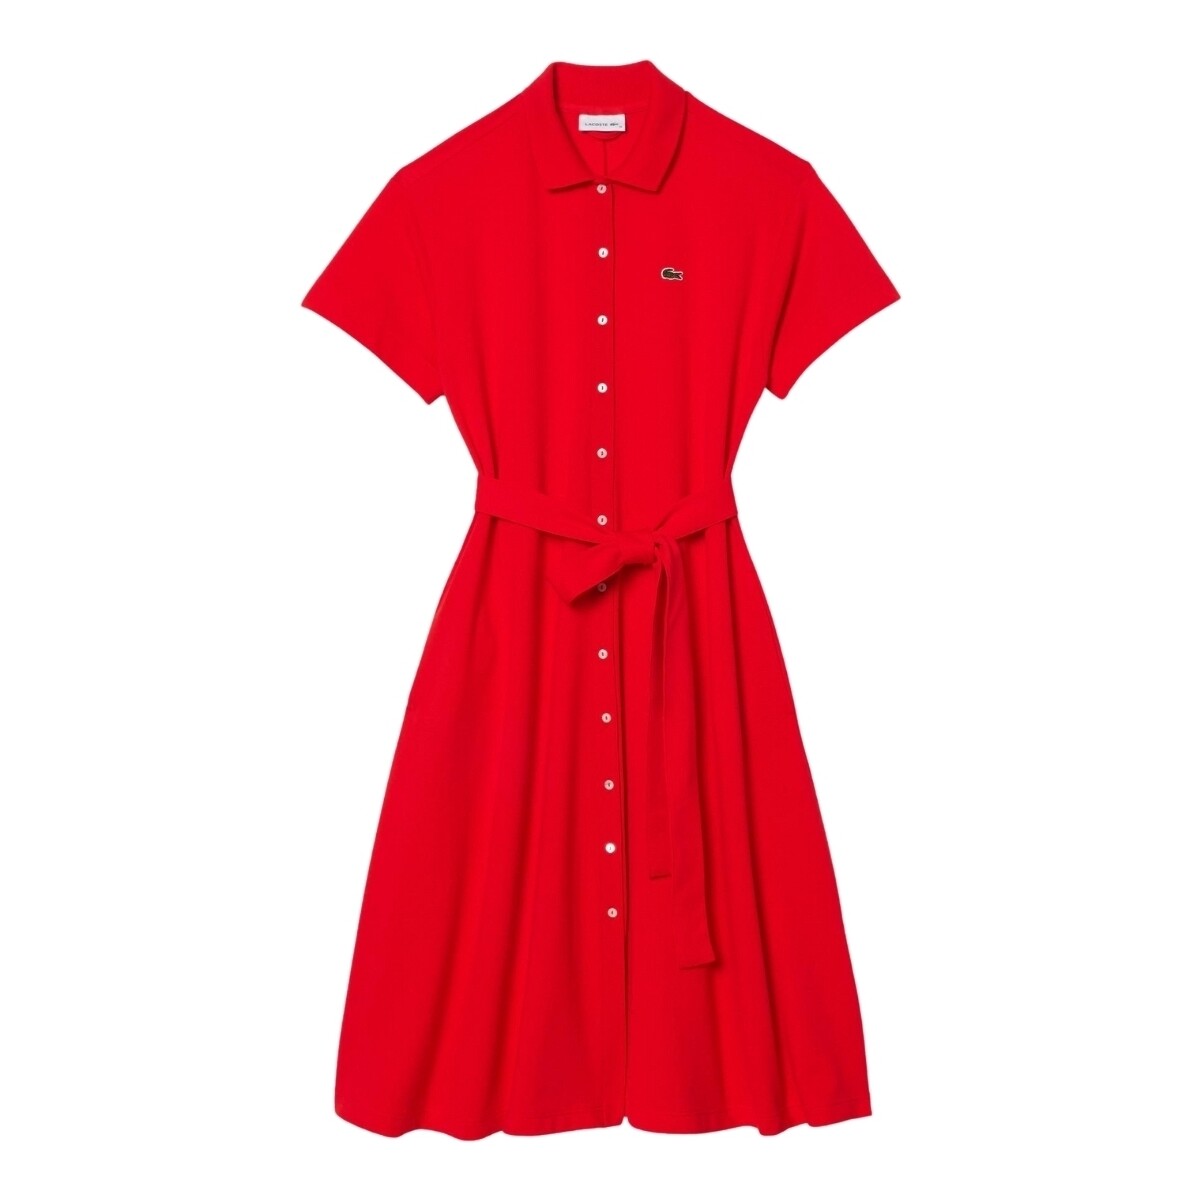 Vêtements Femme Robes Lacoste Robe polo  Ref 62399 F8M Rouge Rouge